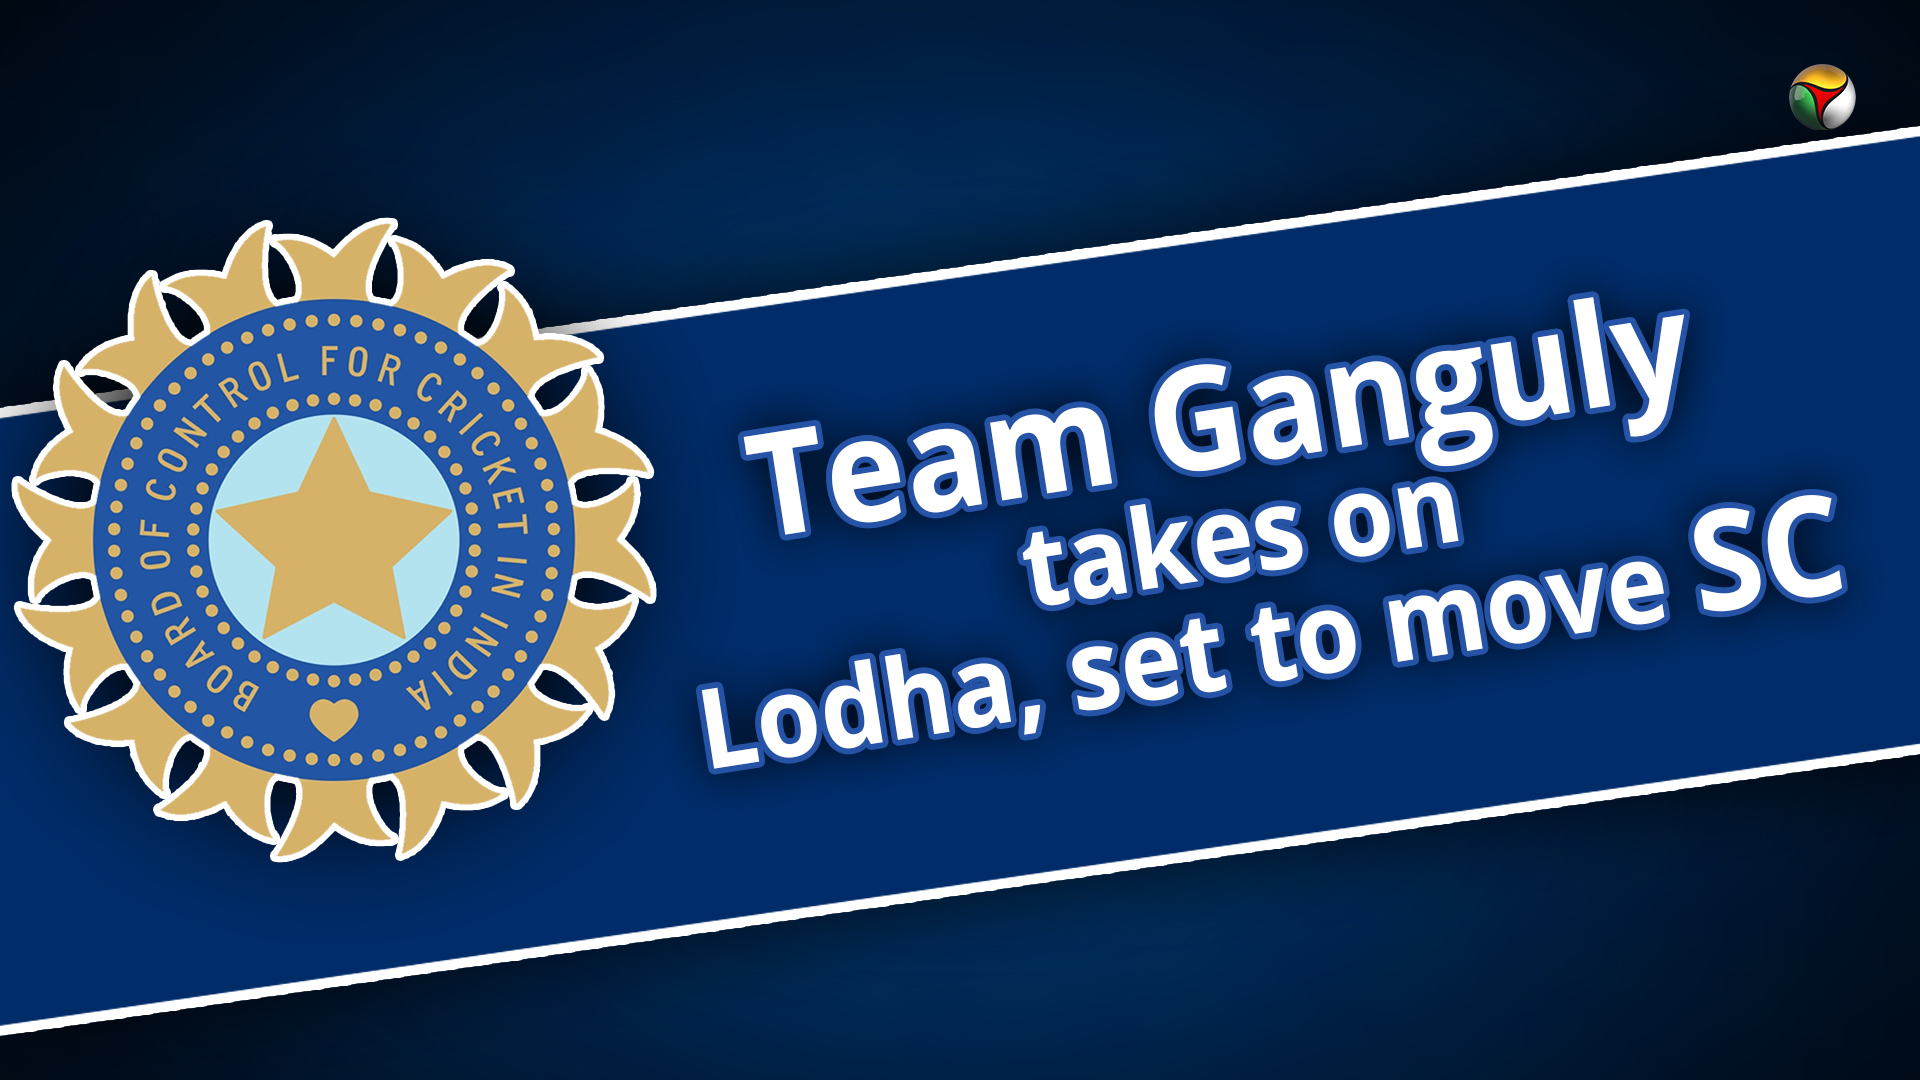 Team Ganguly takes on Lodha, set to move SC